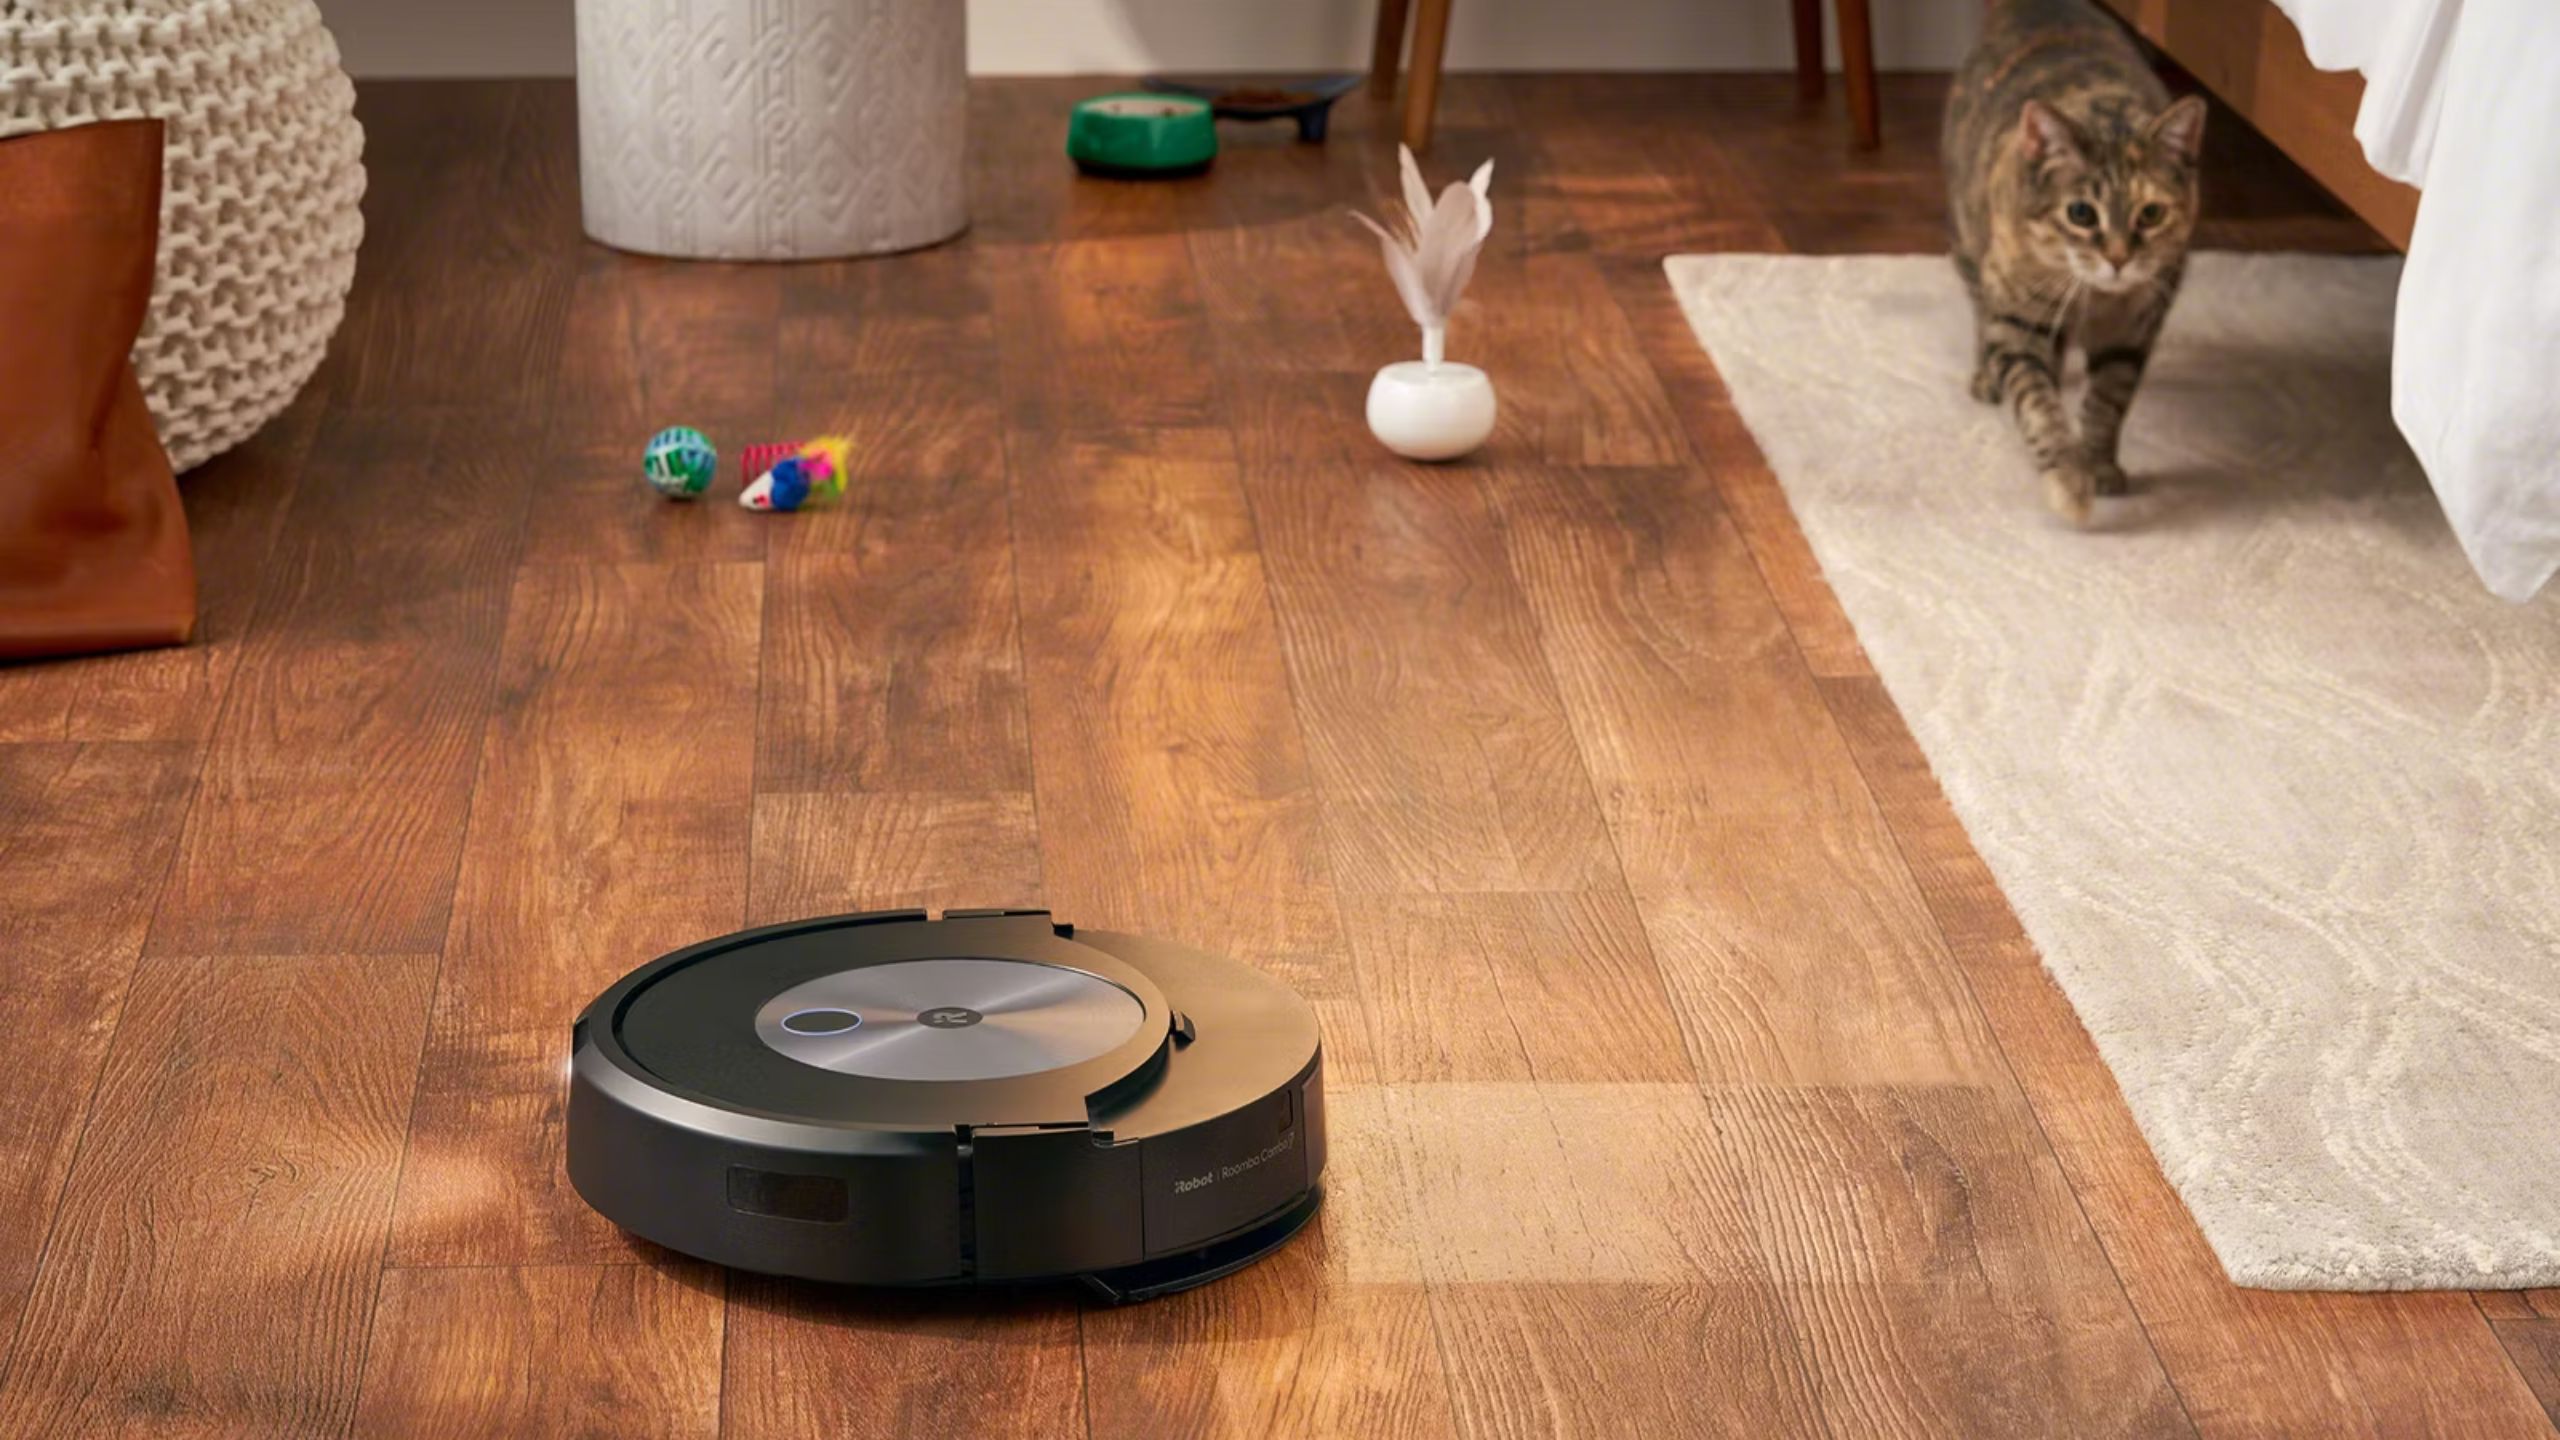 iRobot Roomba Combo J7+ can vacuum and mop at the same time photo 1